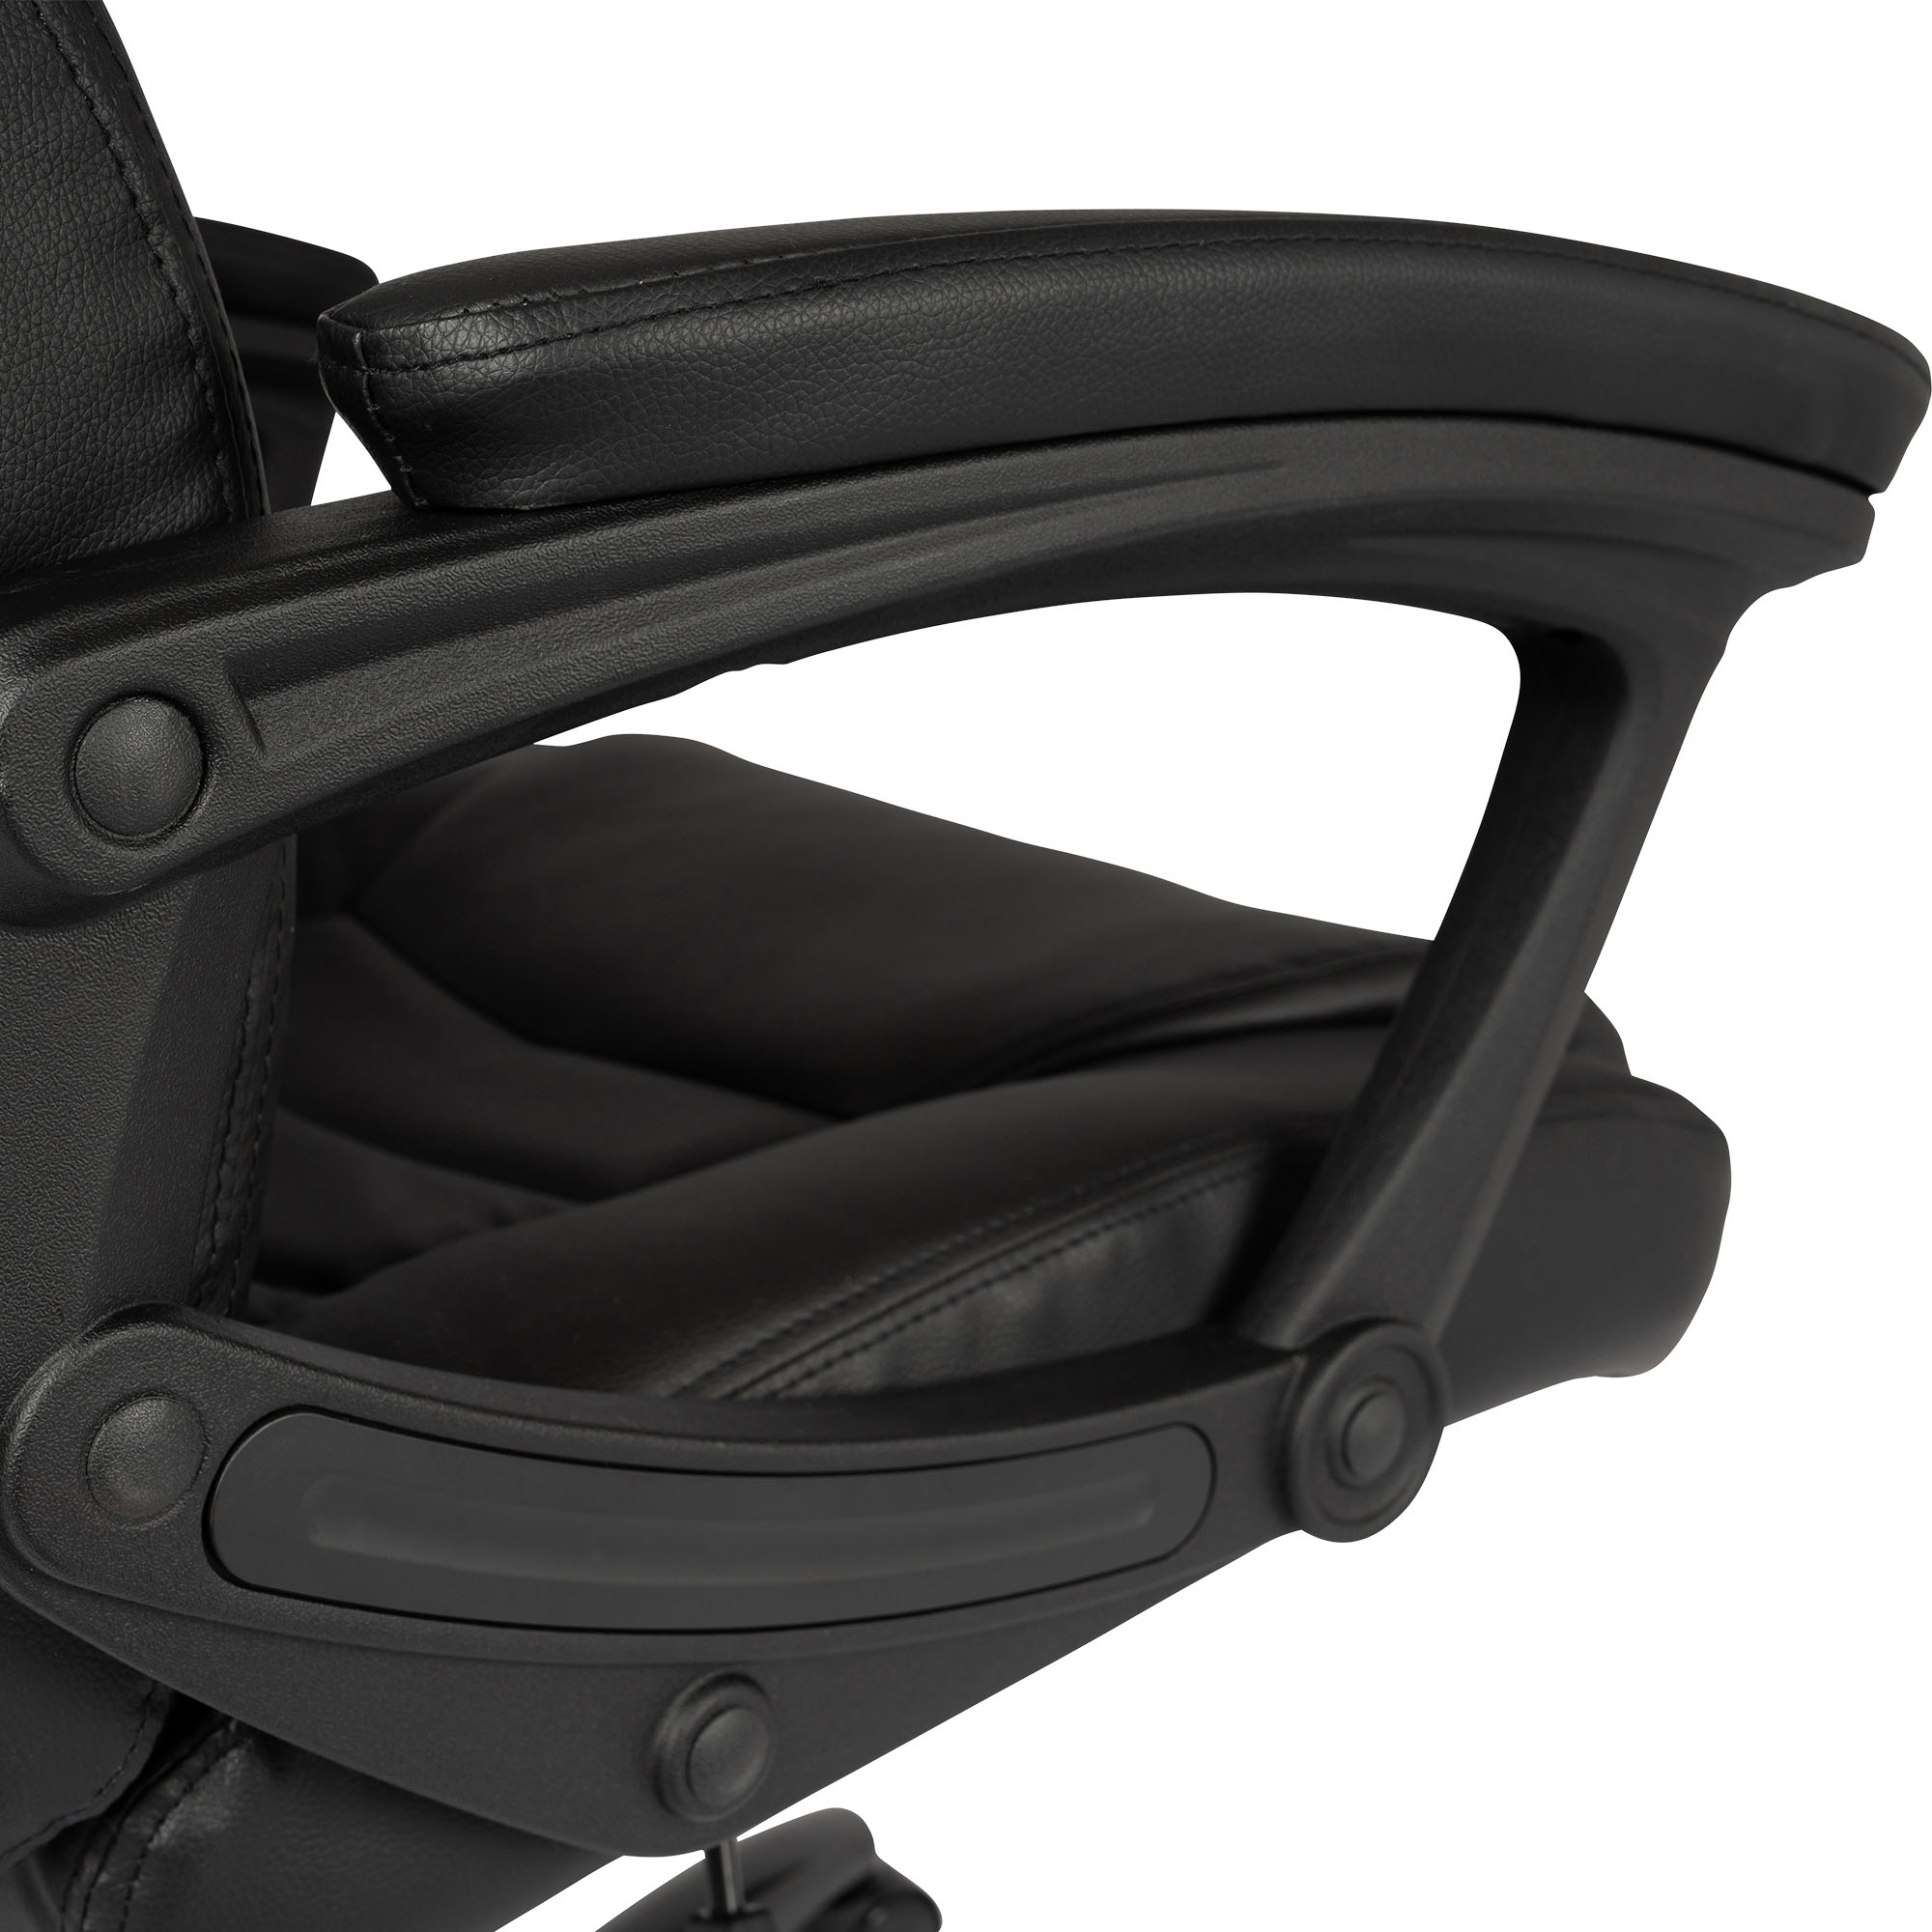 Ergodu Luxury Office Chair with High Sitting Comfort armrests